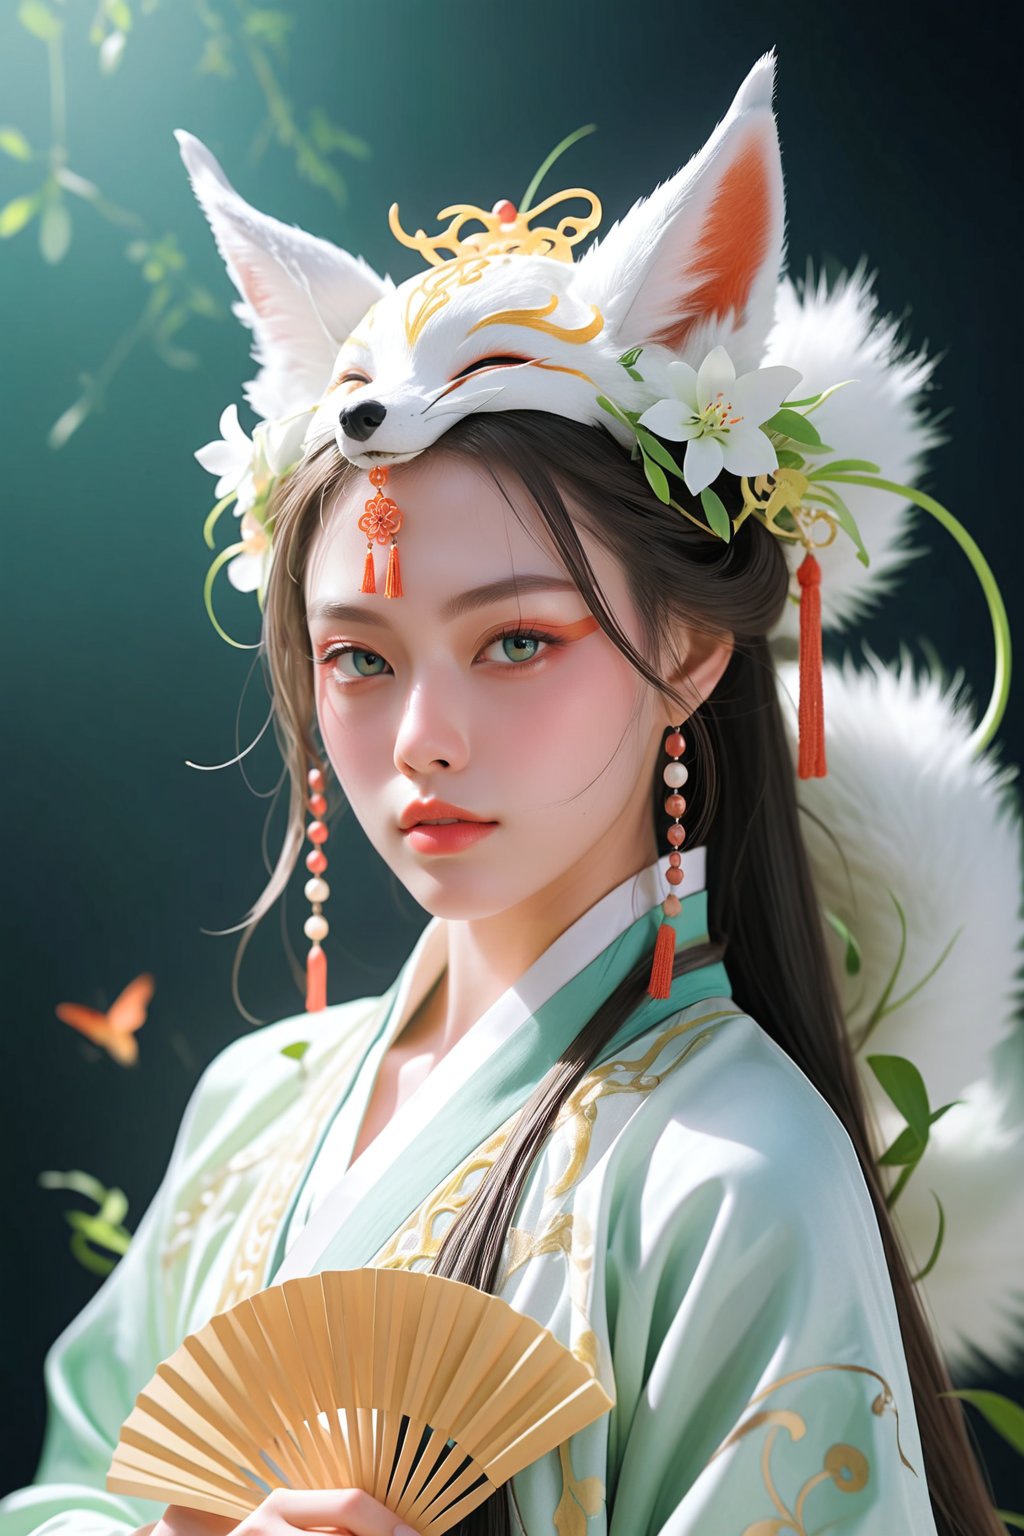 A fox girl, fan, biting the end of a fan , the covering her mouth, showcasing a sly expression and wide eyes. She has nine fluffy tails trailing behind her, with long fox ears perched on top of her head. Dressed in traditional style clothing against a gradient background, she exudes a mysterious atmosphere, a high-quality detailed portrait illustration featuring a fox girl holding the fan with tails in front of her mouth, with vibrant colors, deep shadows, and intricate details, ideal for digital art and fantasy character design.hanfu,